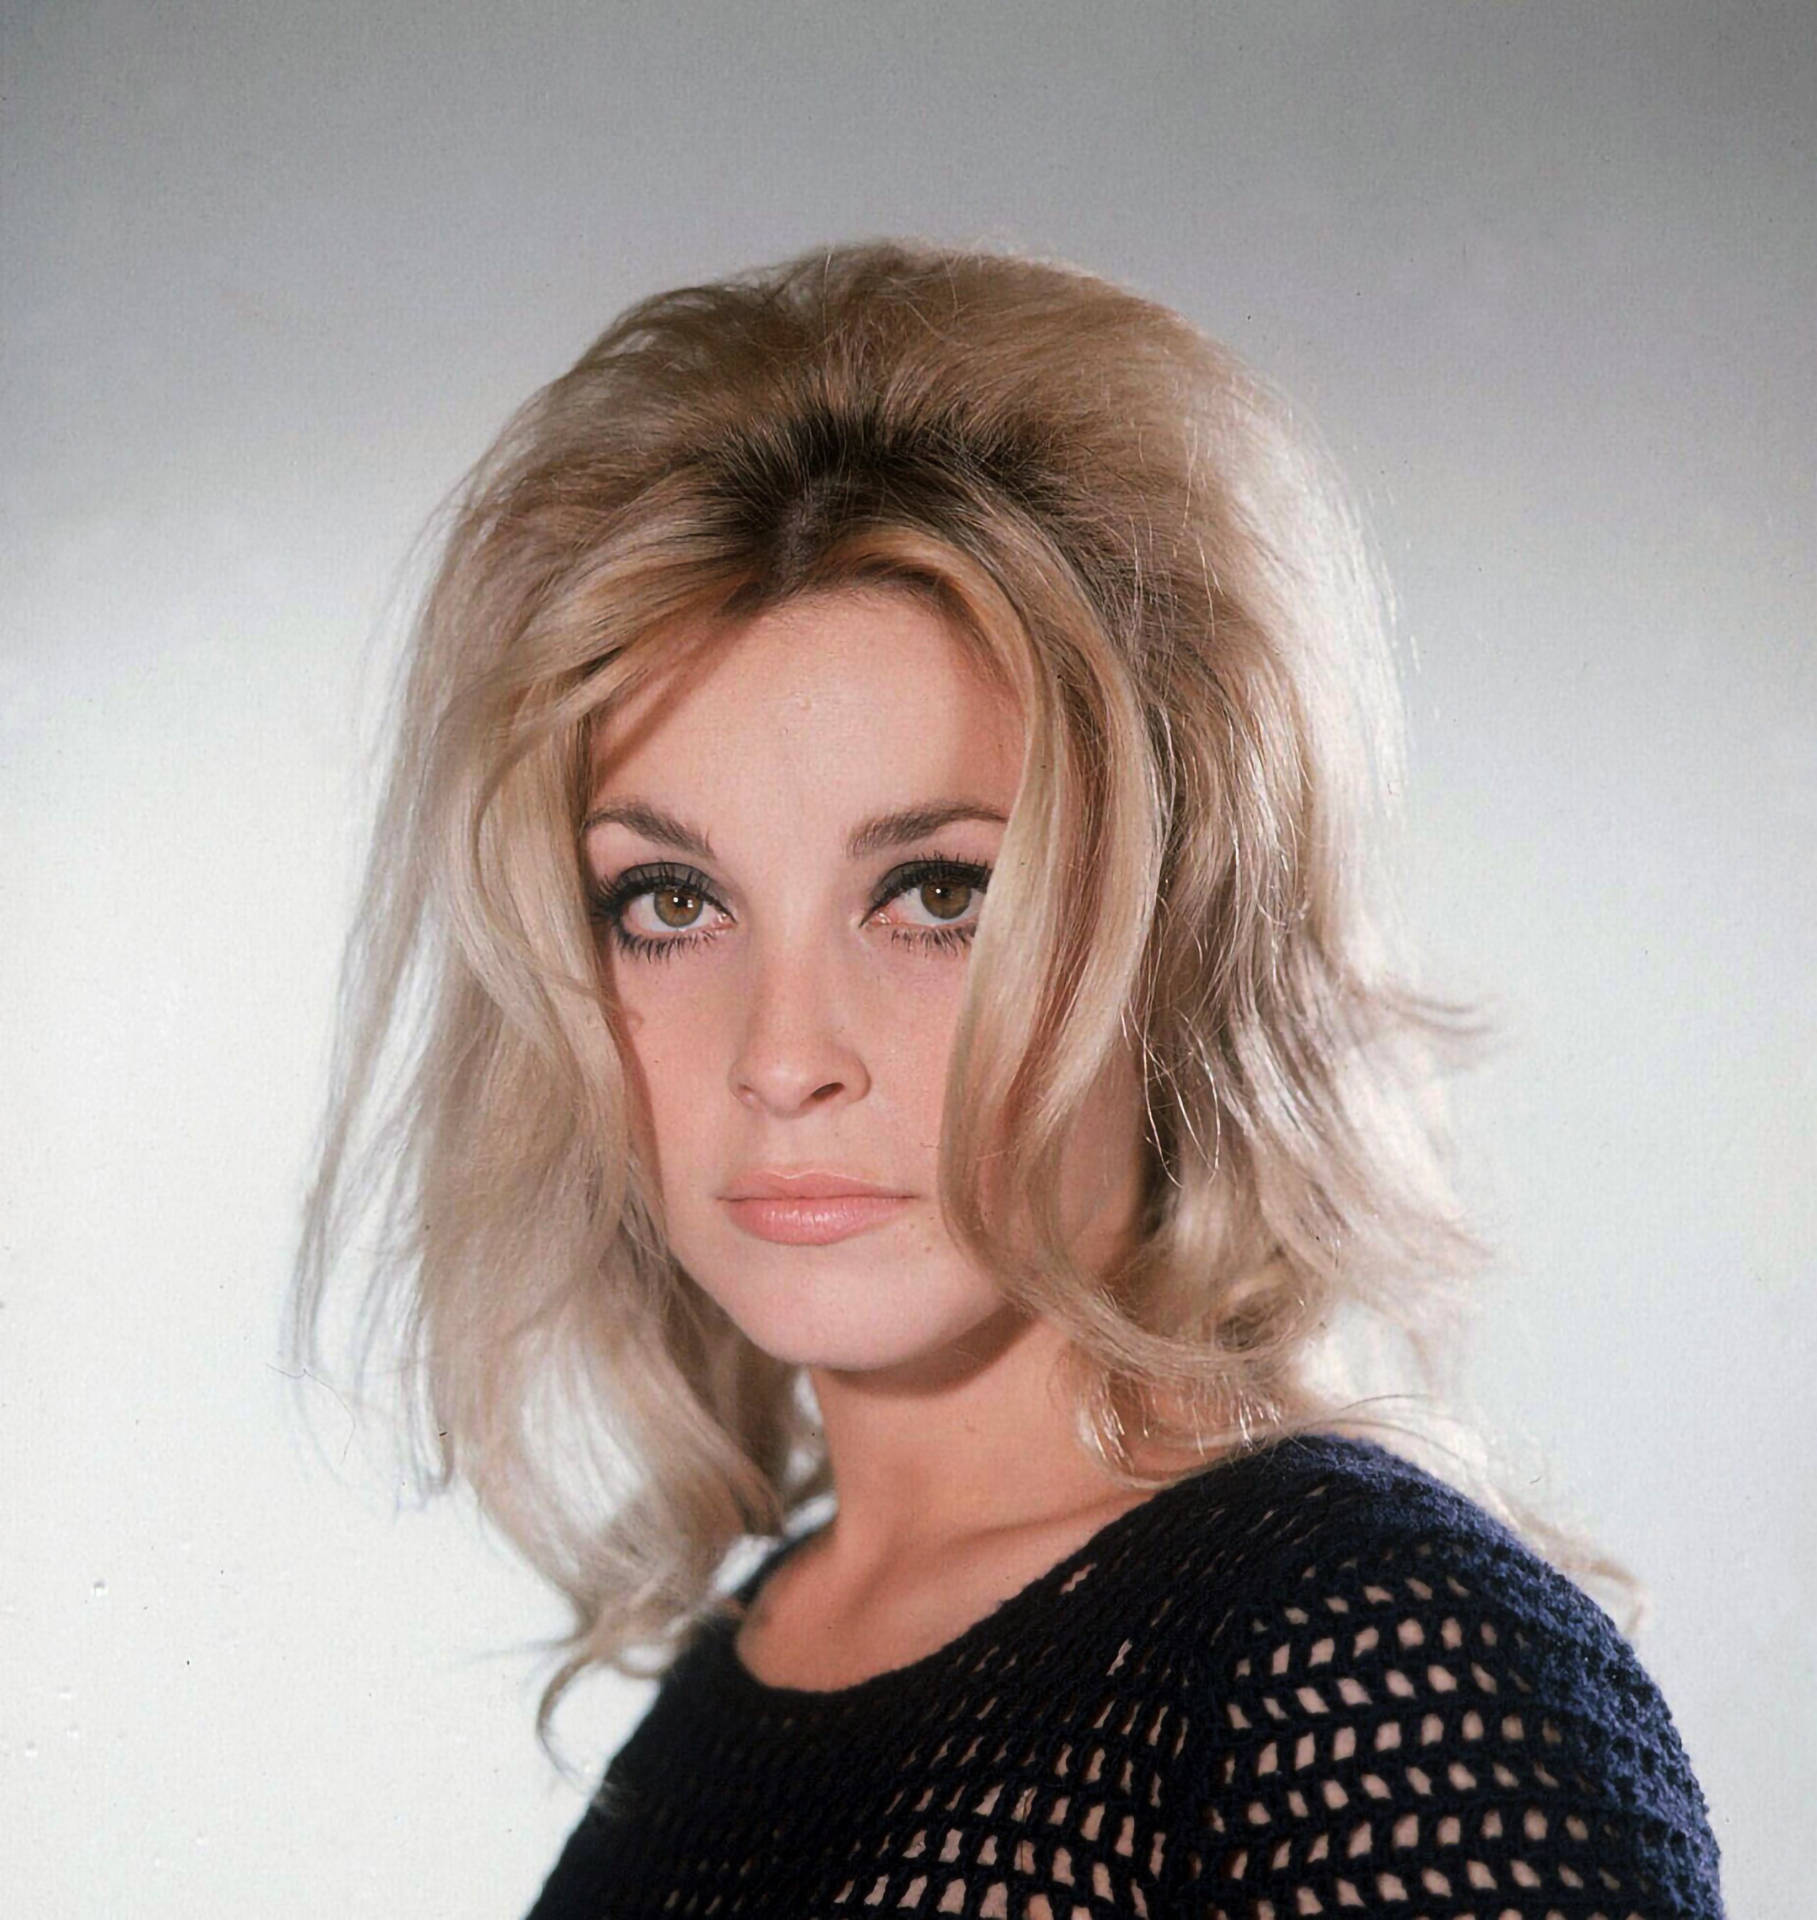 Sharon Tate Posing with Elusive Messy Hairstyle Wallpaper